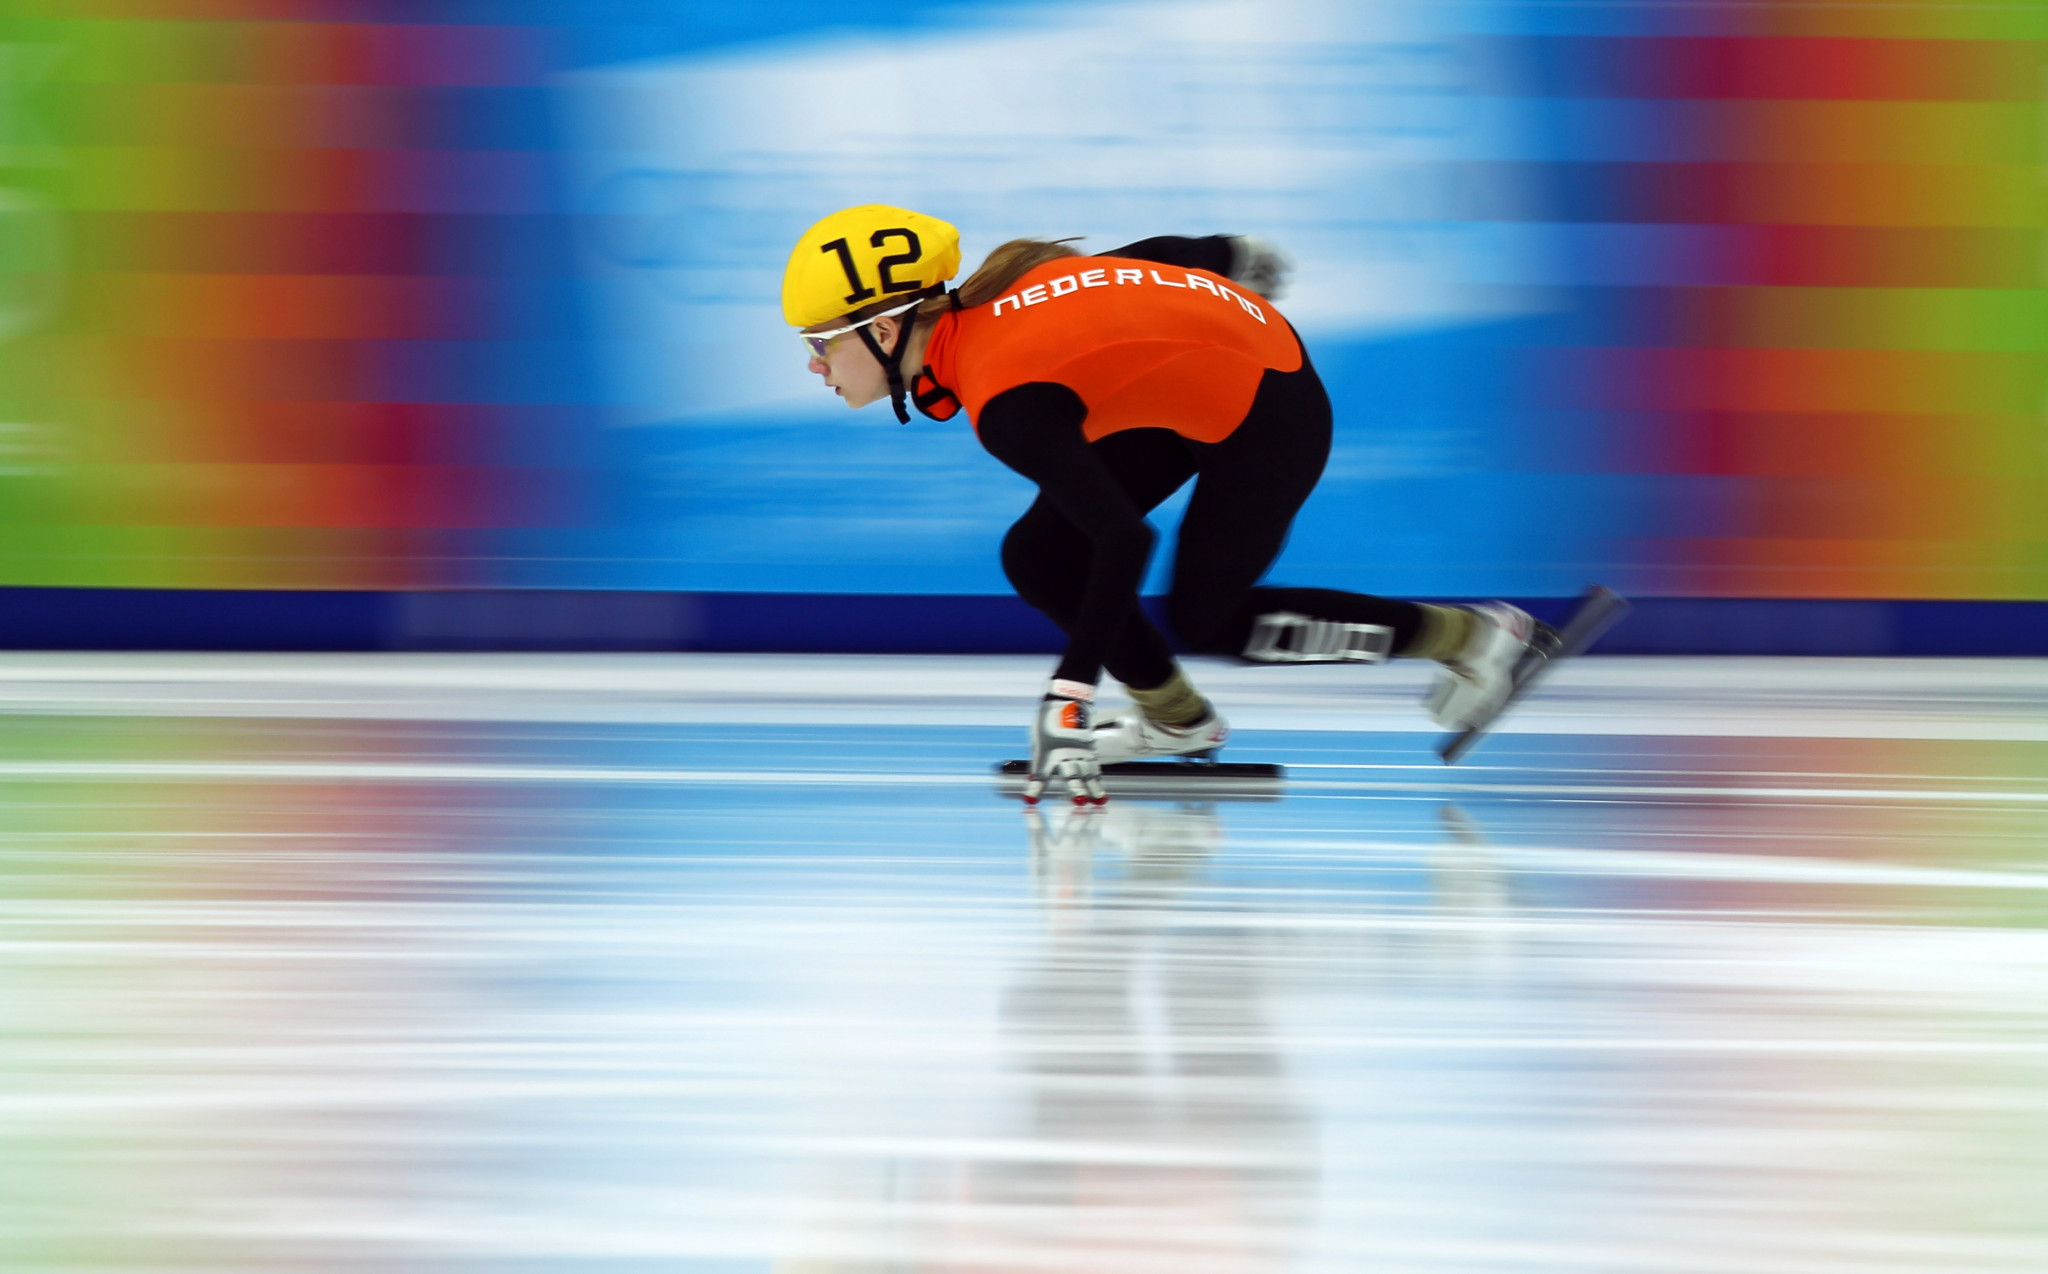 The Netherlands will be expected to win multiple medals at the World Junior Speed Skating Championships ©Getty Images